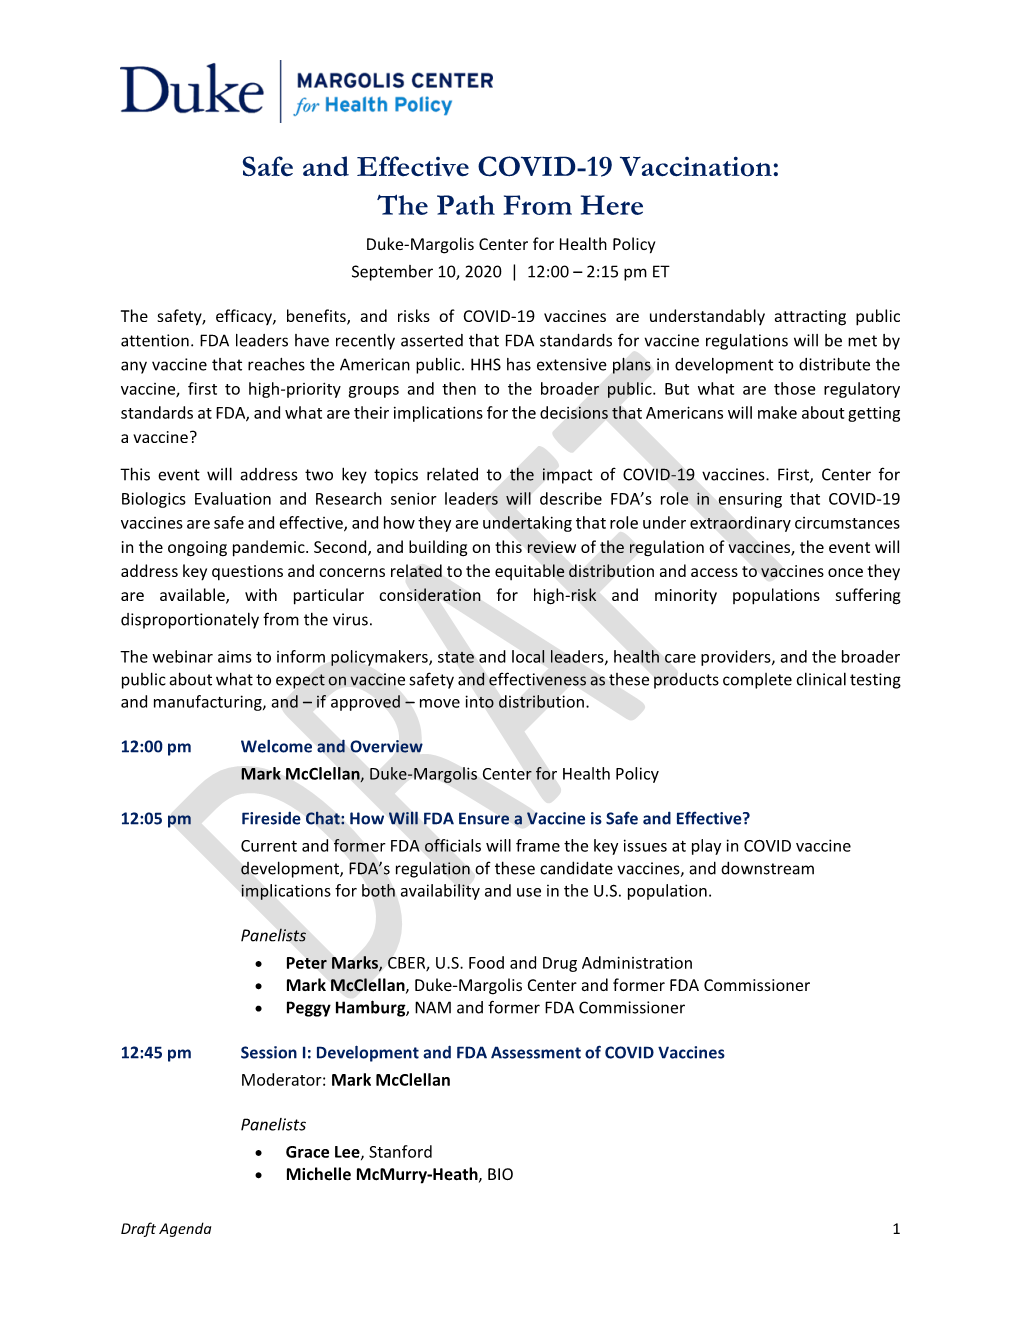 Safe and Effective COVID-19 Vaccination: the Path from Here Duke-Margolis Center for Health Policy September 10, 2020 | 12:00 – 2:15 Pm ET